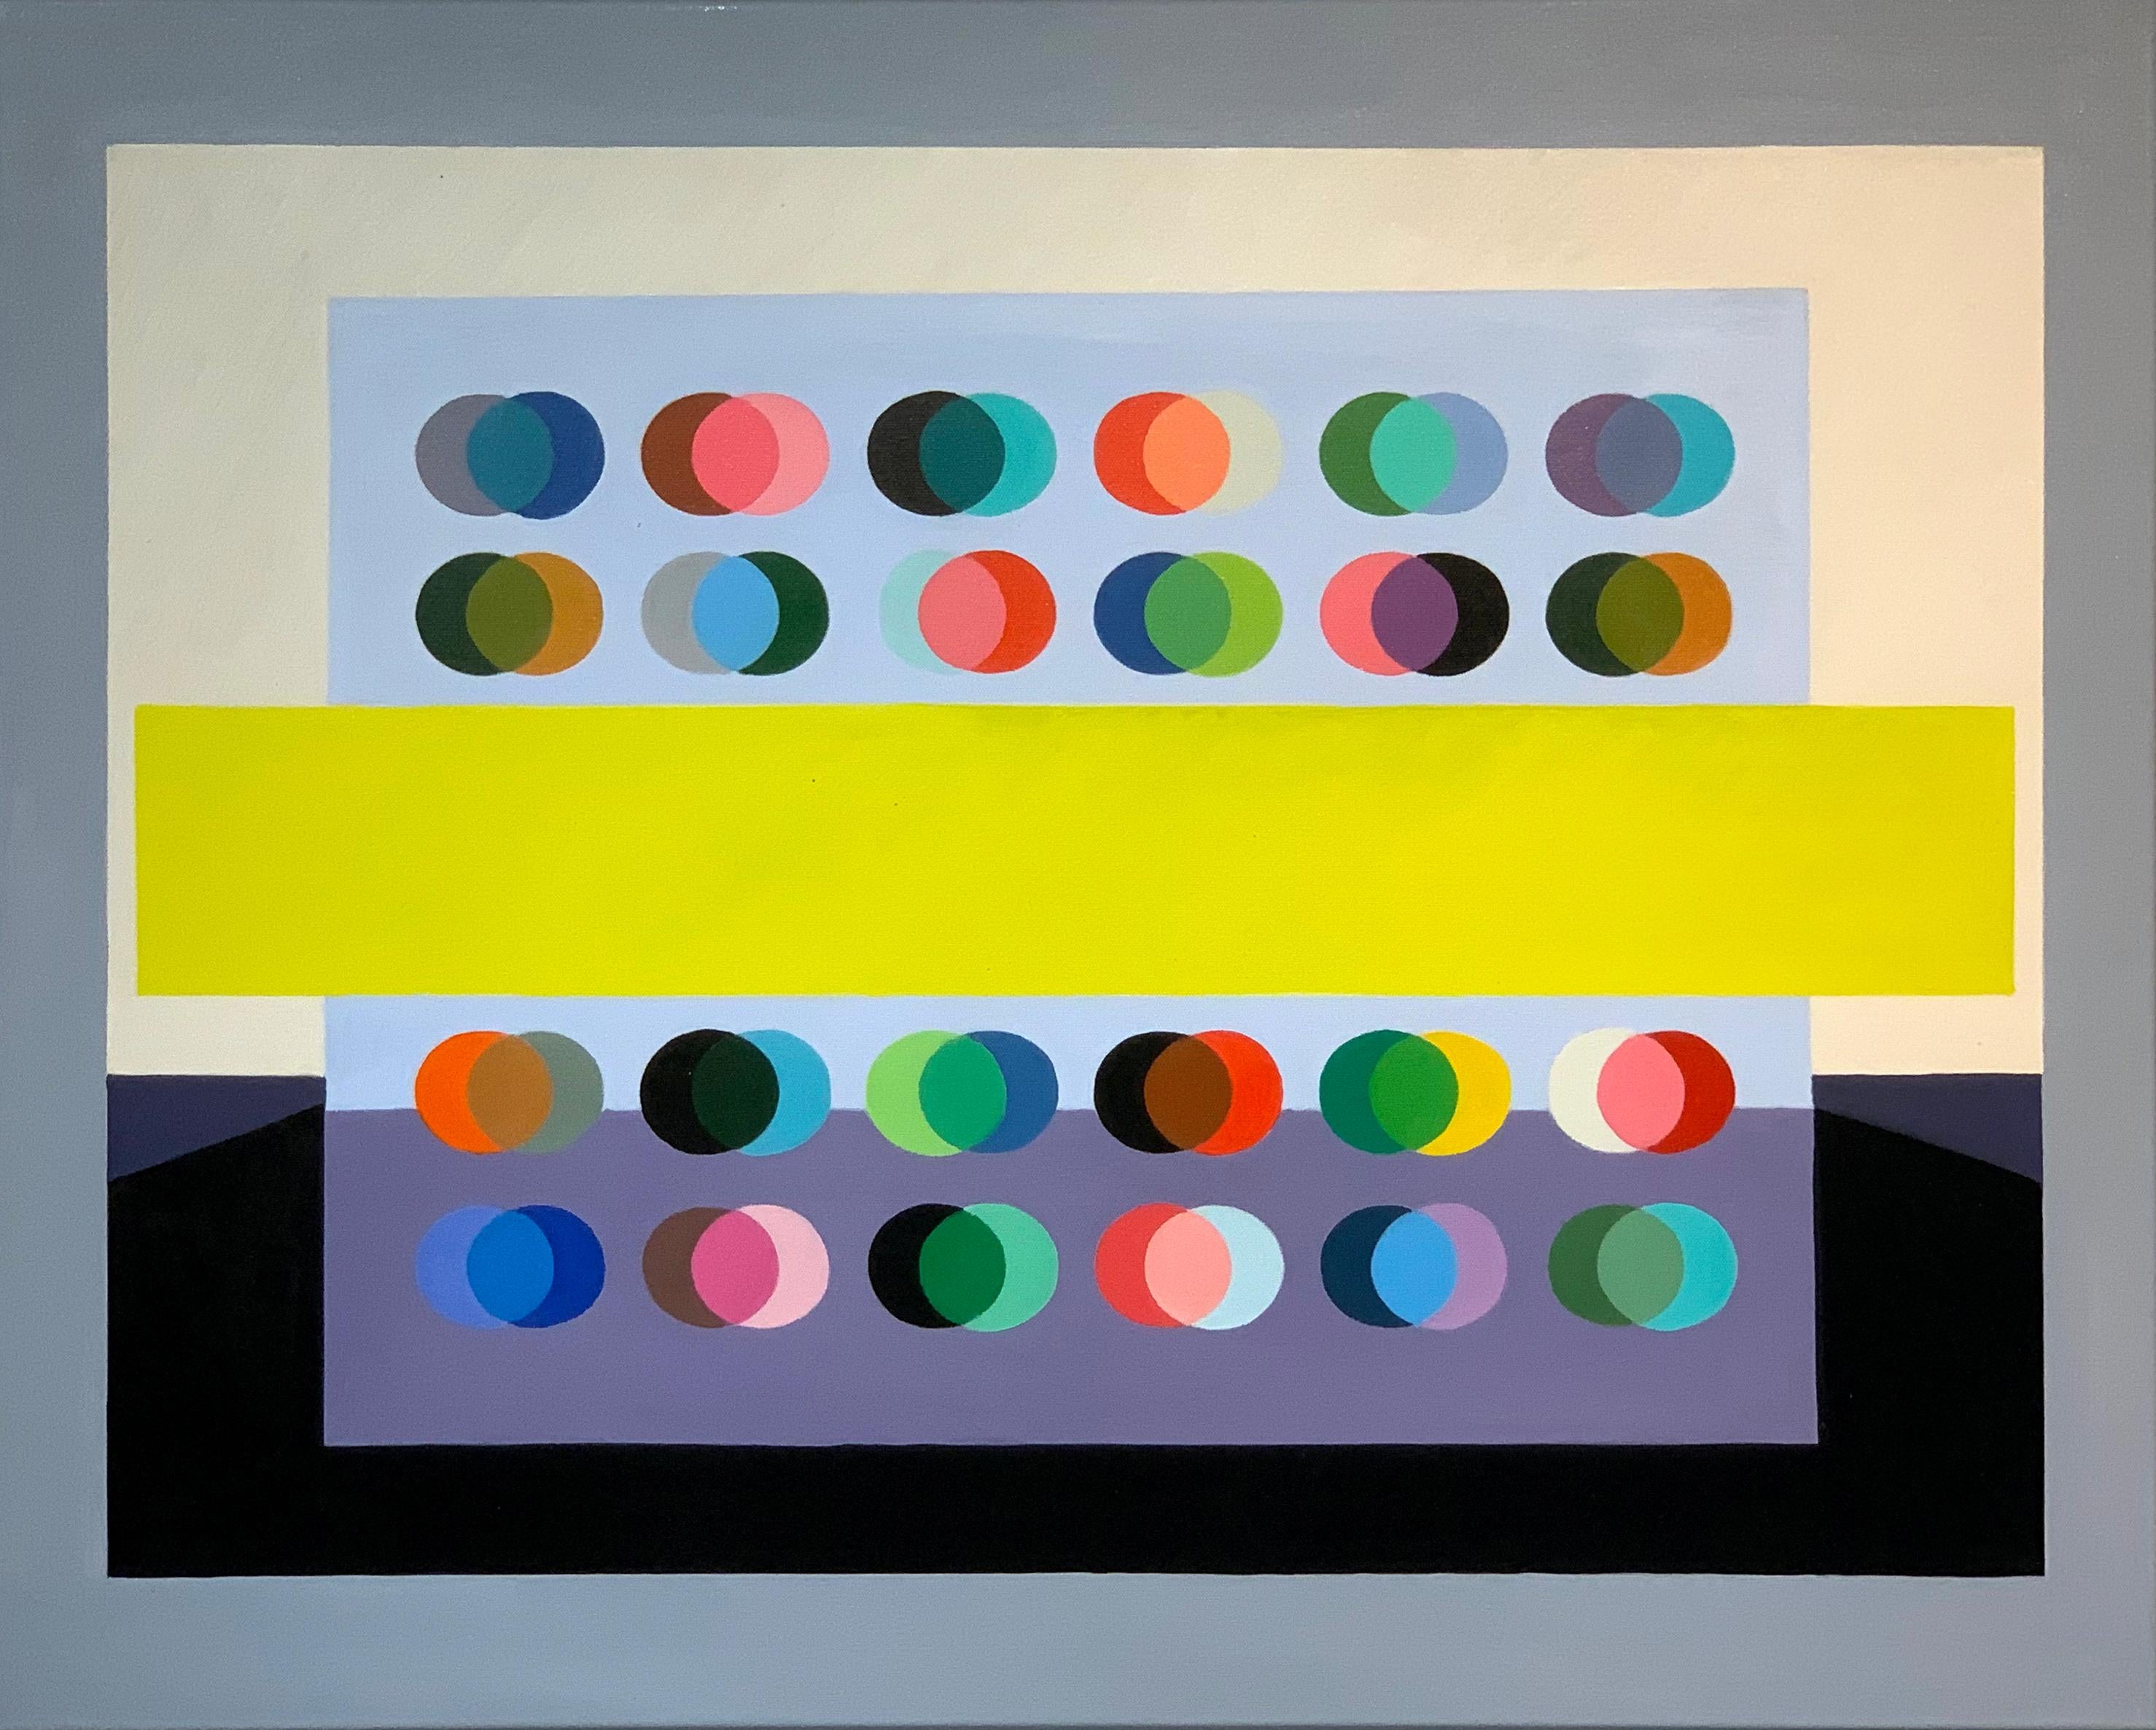 Dream Big by Lilly Muth - Contemporary geometric abstraction - Oil Painting